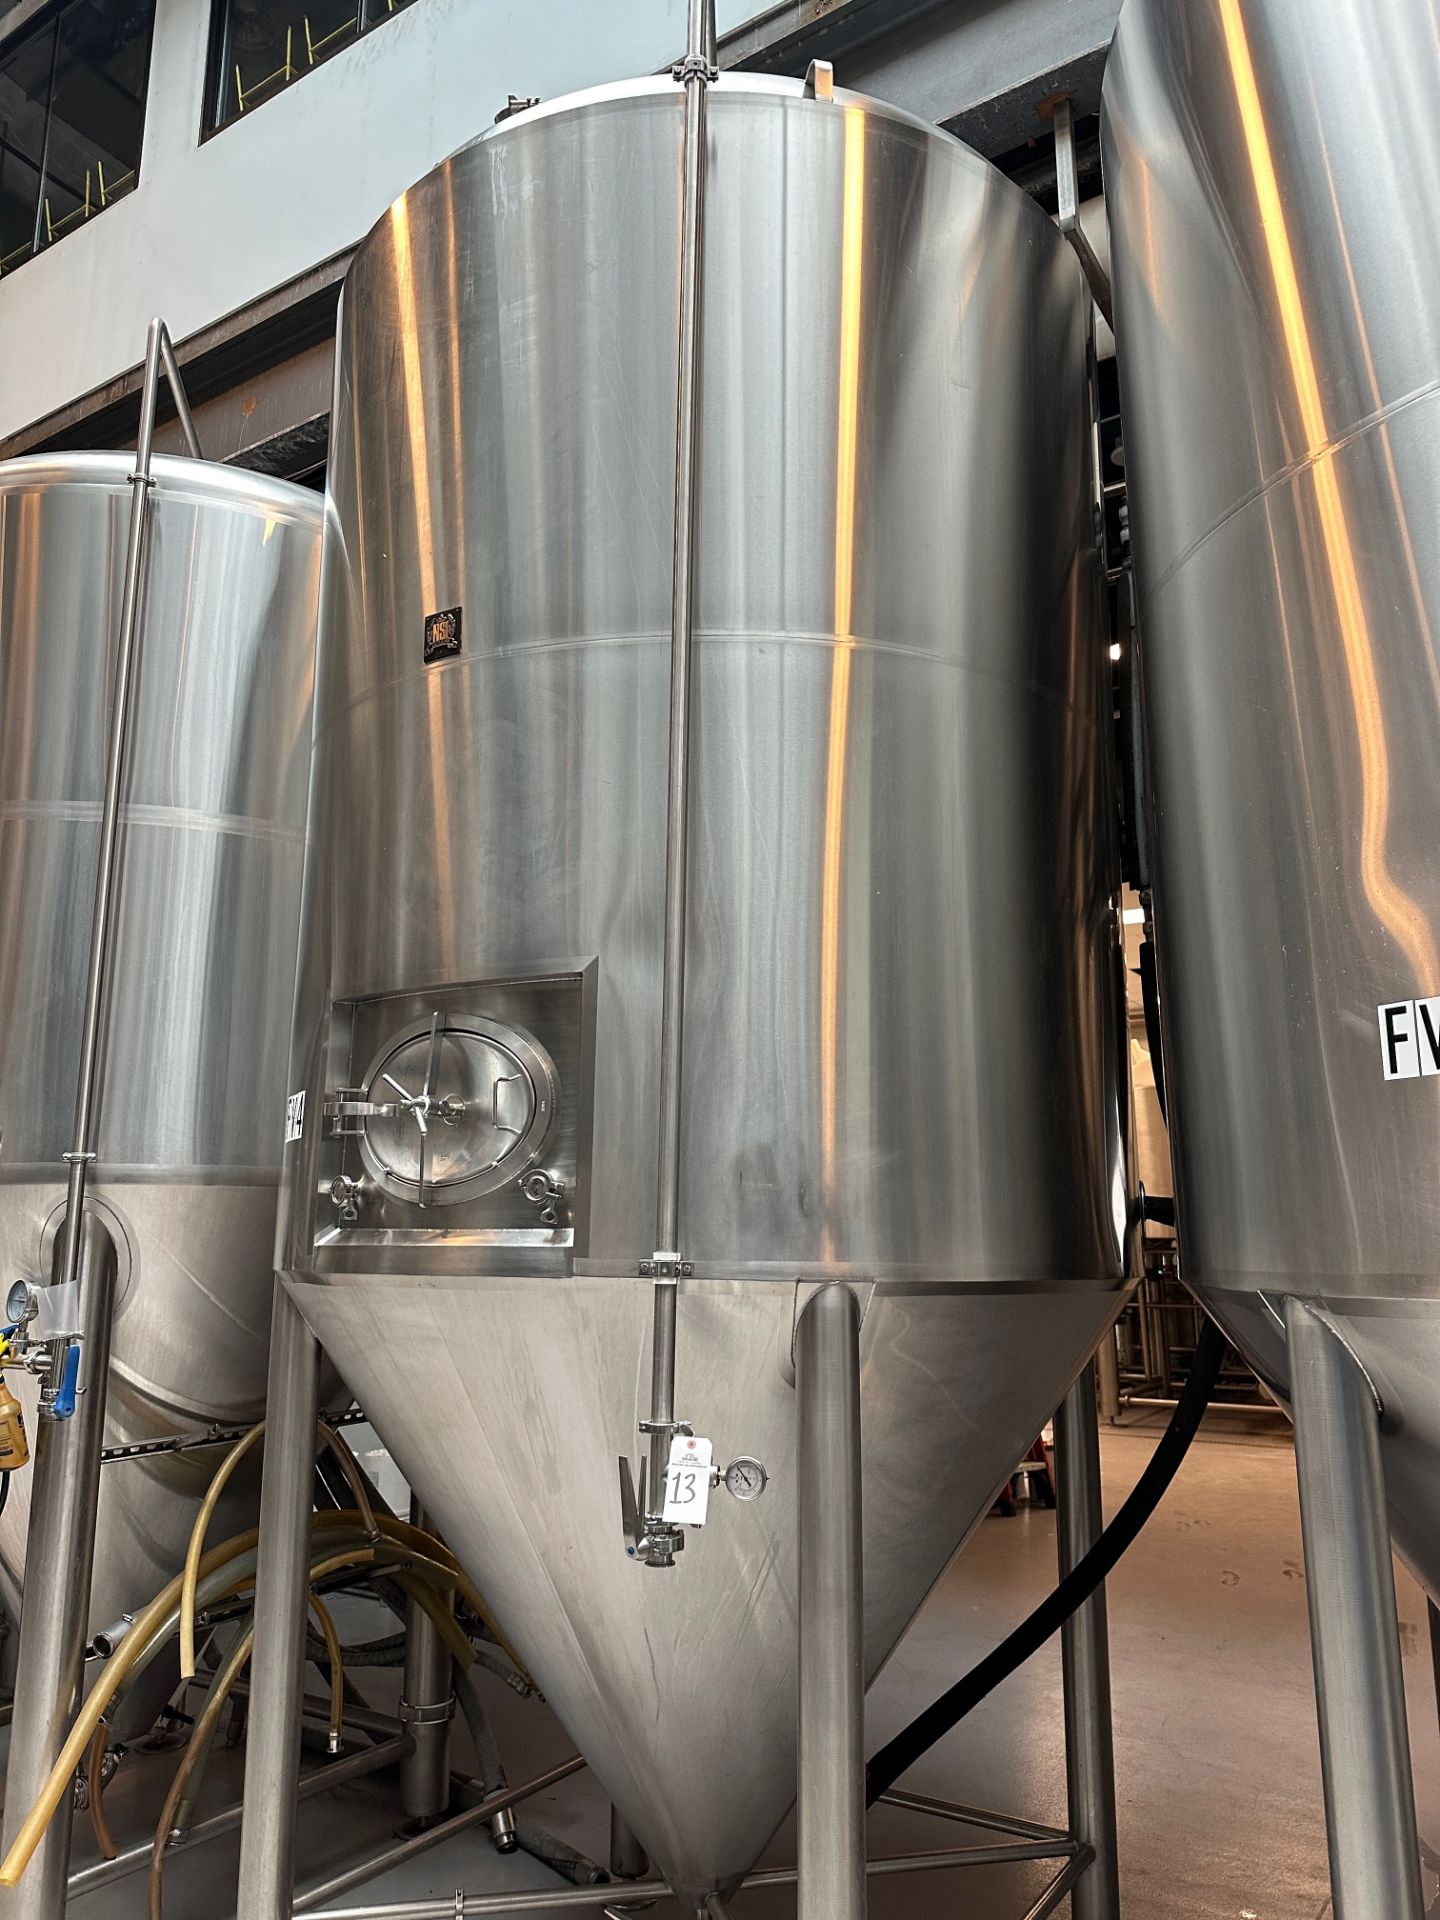 Complete 40 BBL Microbrewery - 40 BBL Deutsche 4-Vessel Brewhouse, Tanks, Can Line - See Description - Image 37 of 335